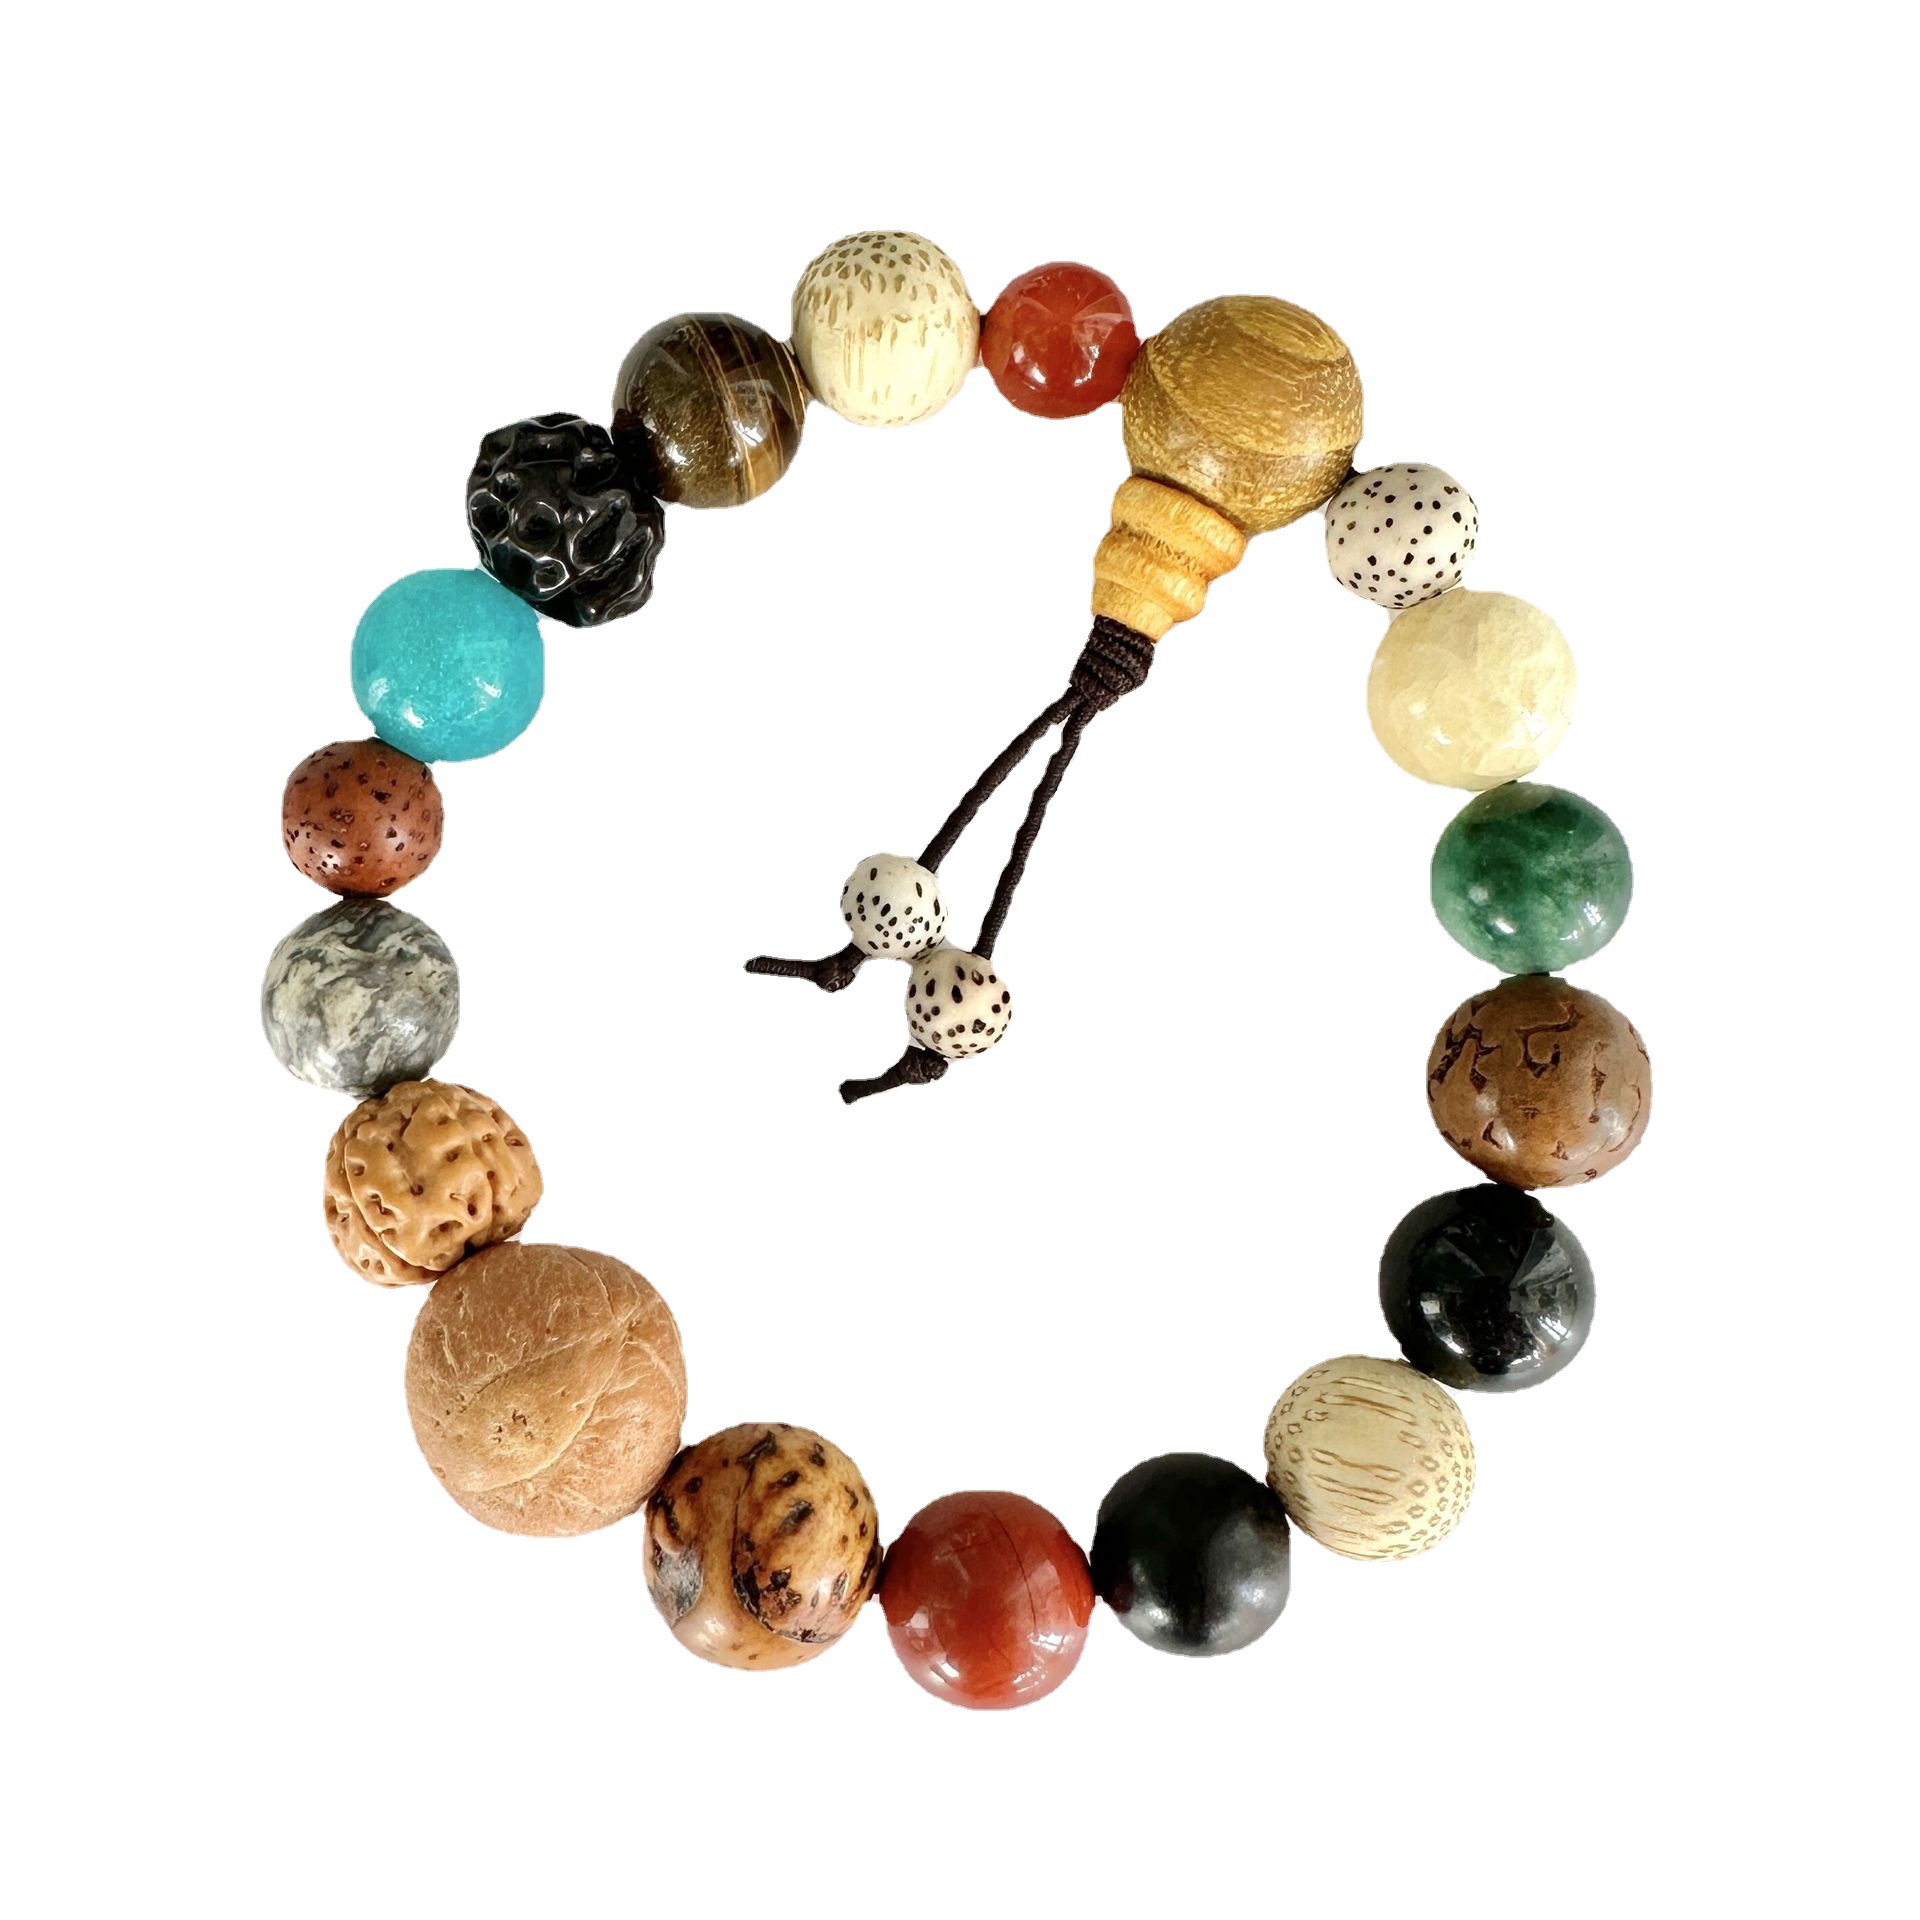 Lingyin 18-Seed Bodhi Bracelet 18-Seed Bracelet in Stock Wholesale Buddha Beads for Temple Live Broadcast Attractions